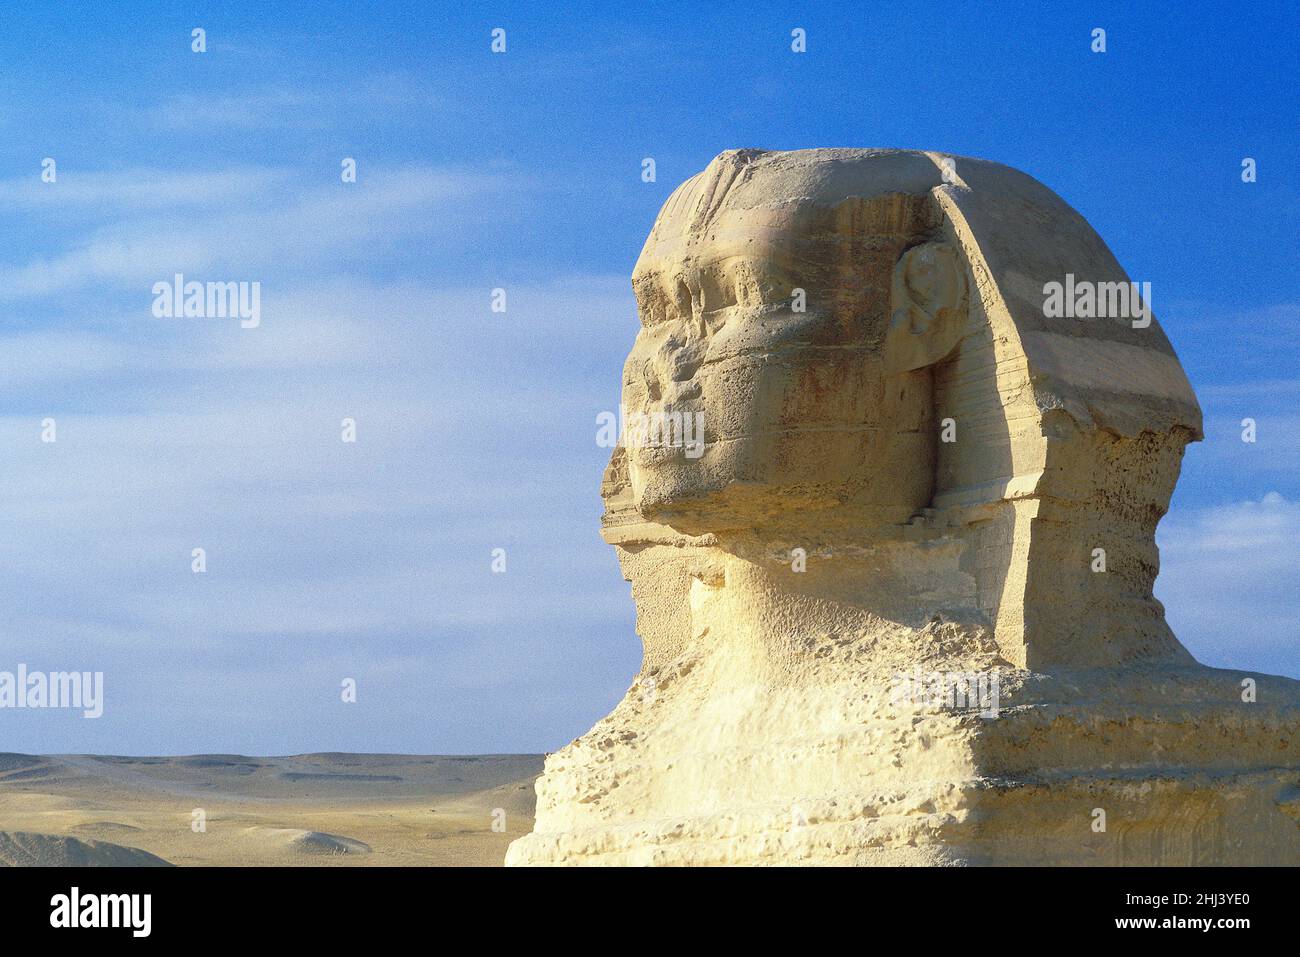 The Great Sphinx, Giza, Egypt Stock Photo